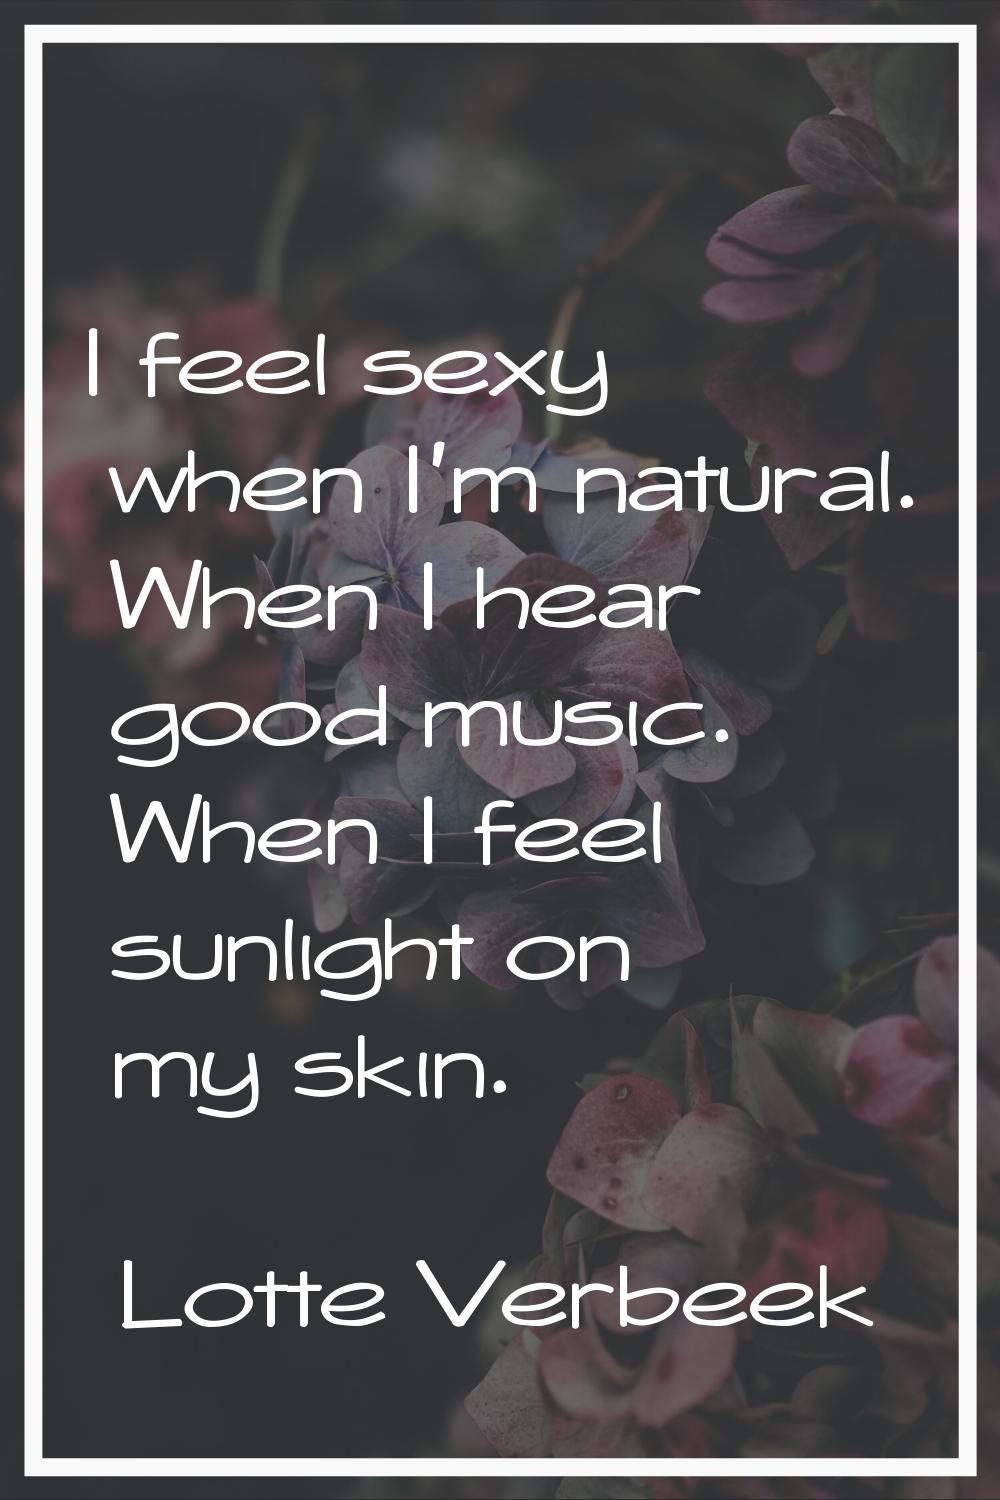 I feel sexy when I'm natural. When I hear good music. When I feel sunlight on my skin.